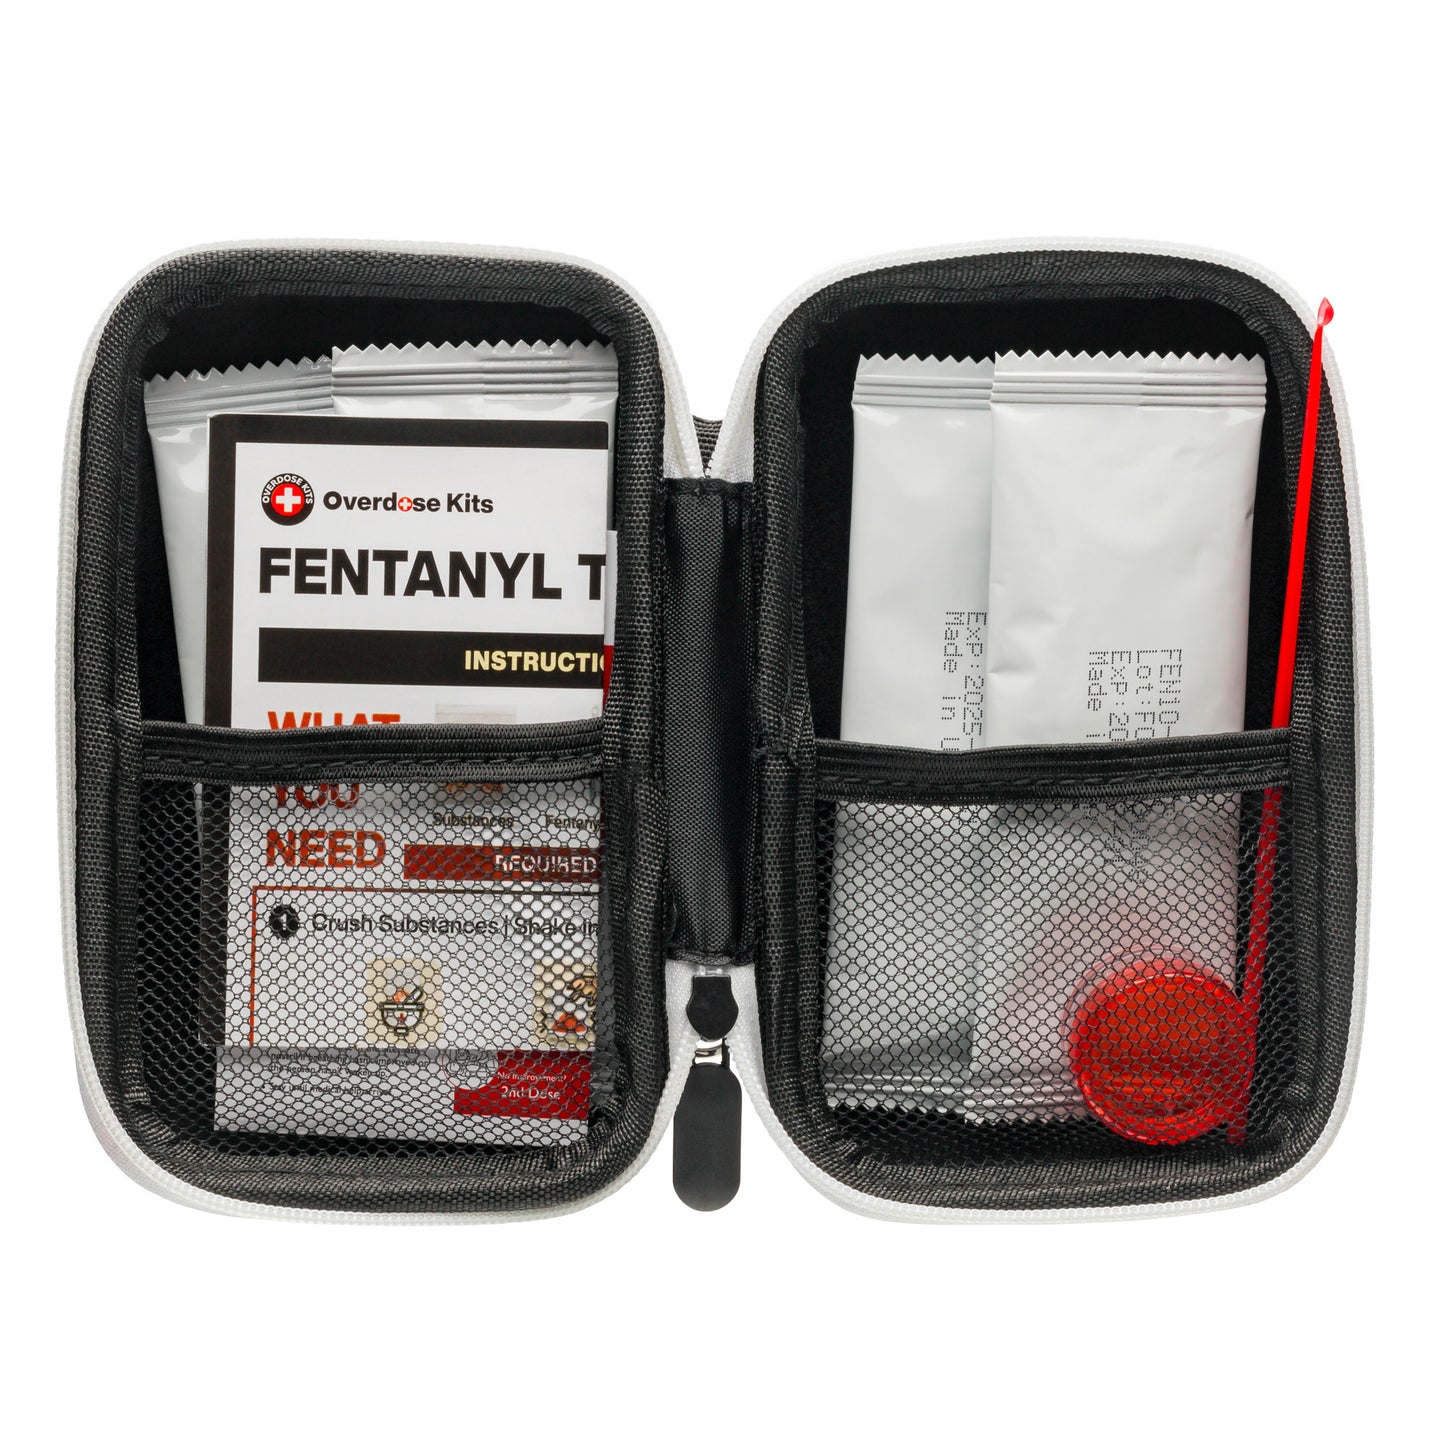 Fentanyl Test Strip Opioid Overdose Prevention Kit - Includes 5 Fentanyl Test Strips, Hardshell Case, Mixing Container, 10mg Spoon and Instructions